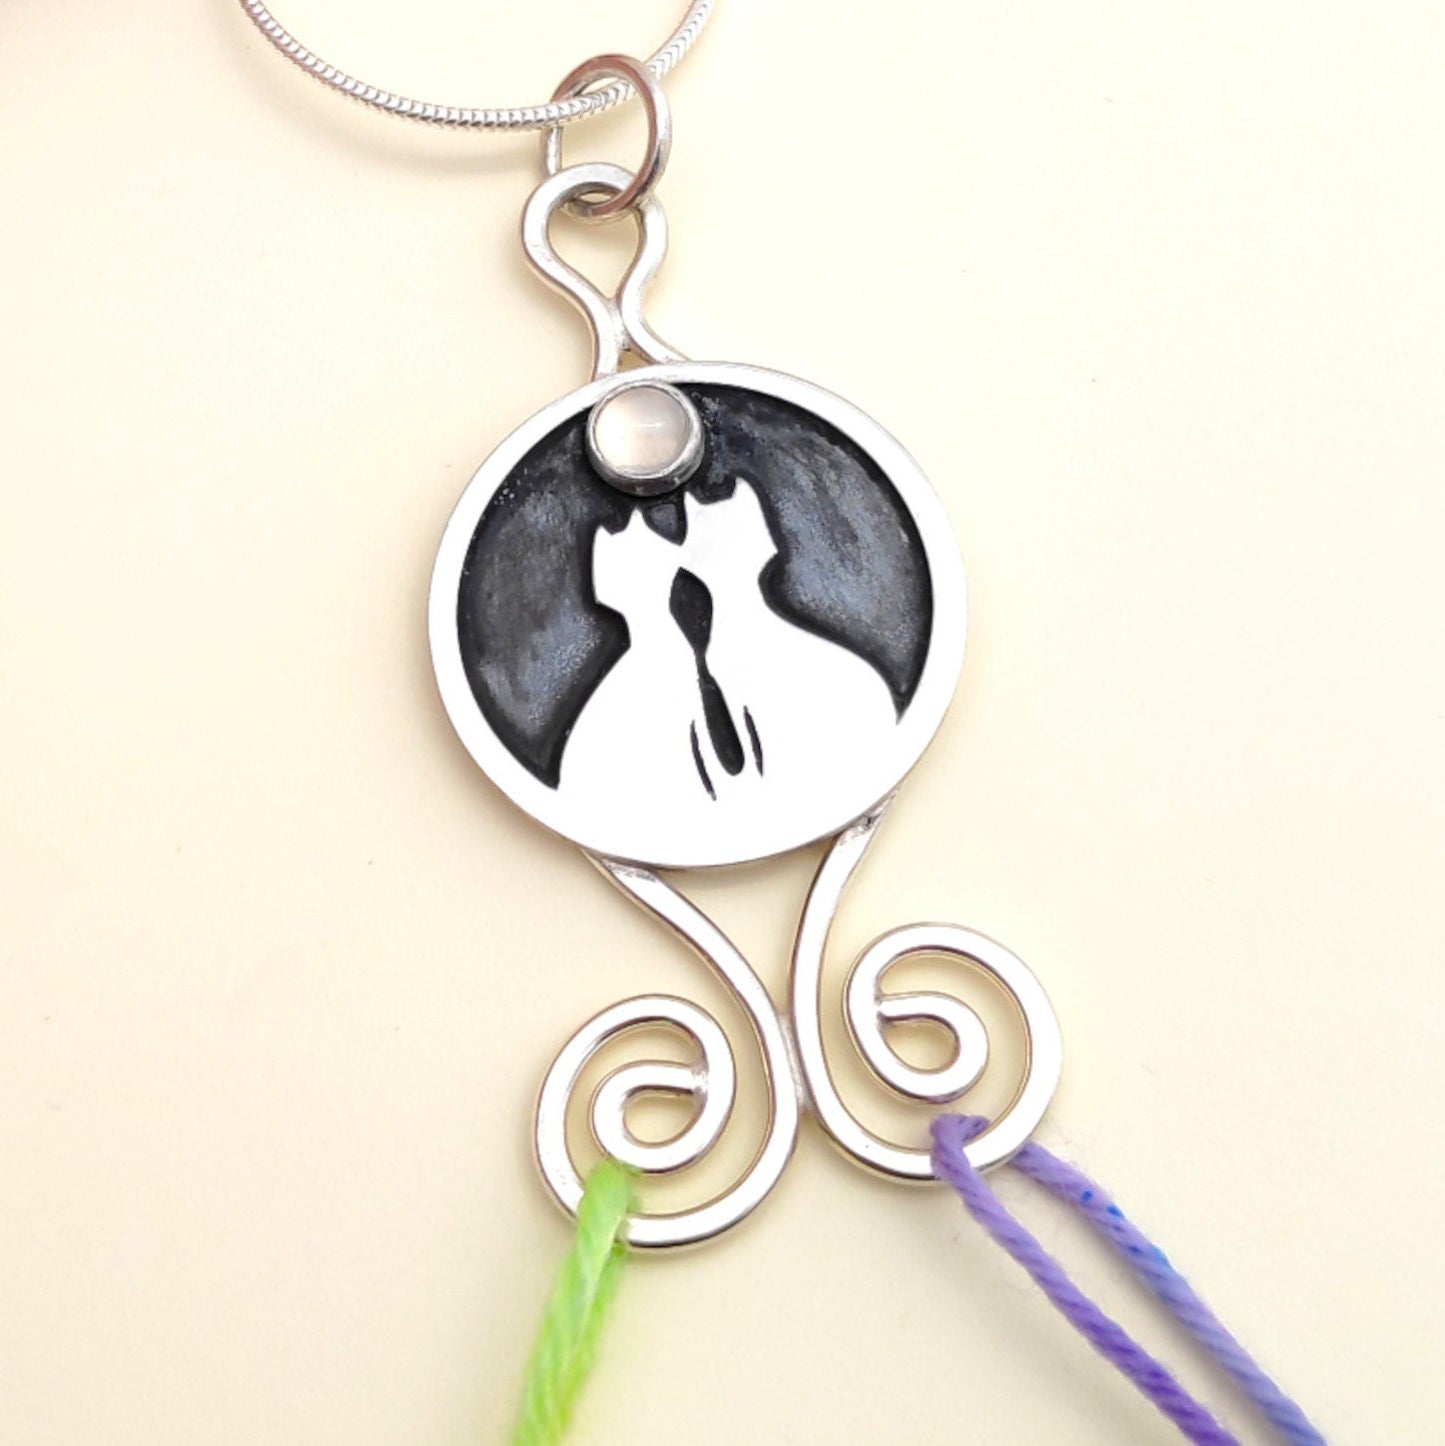 Portuguese Knitting Necklace - Moon Cats